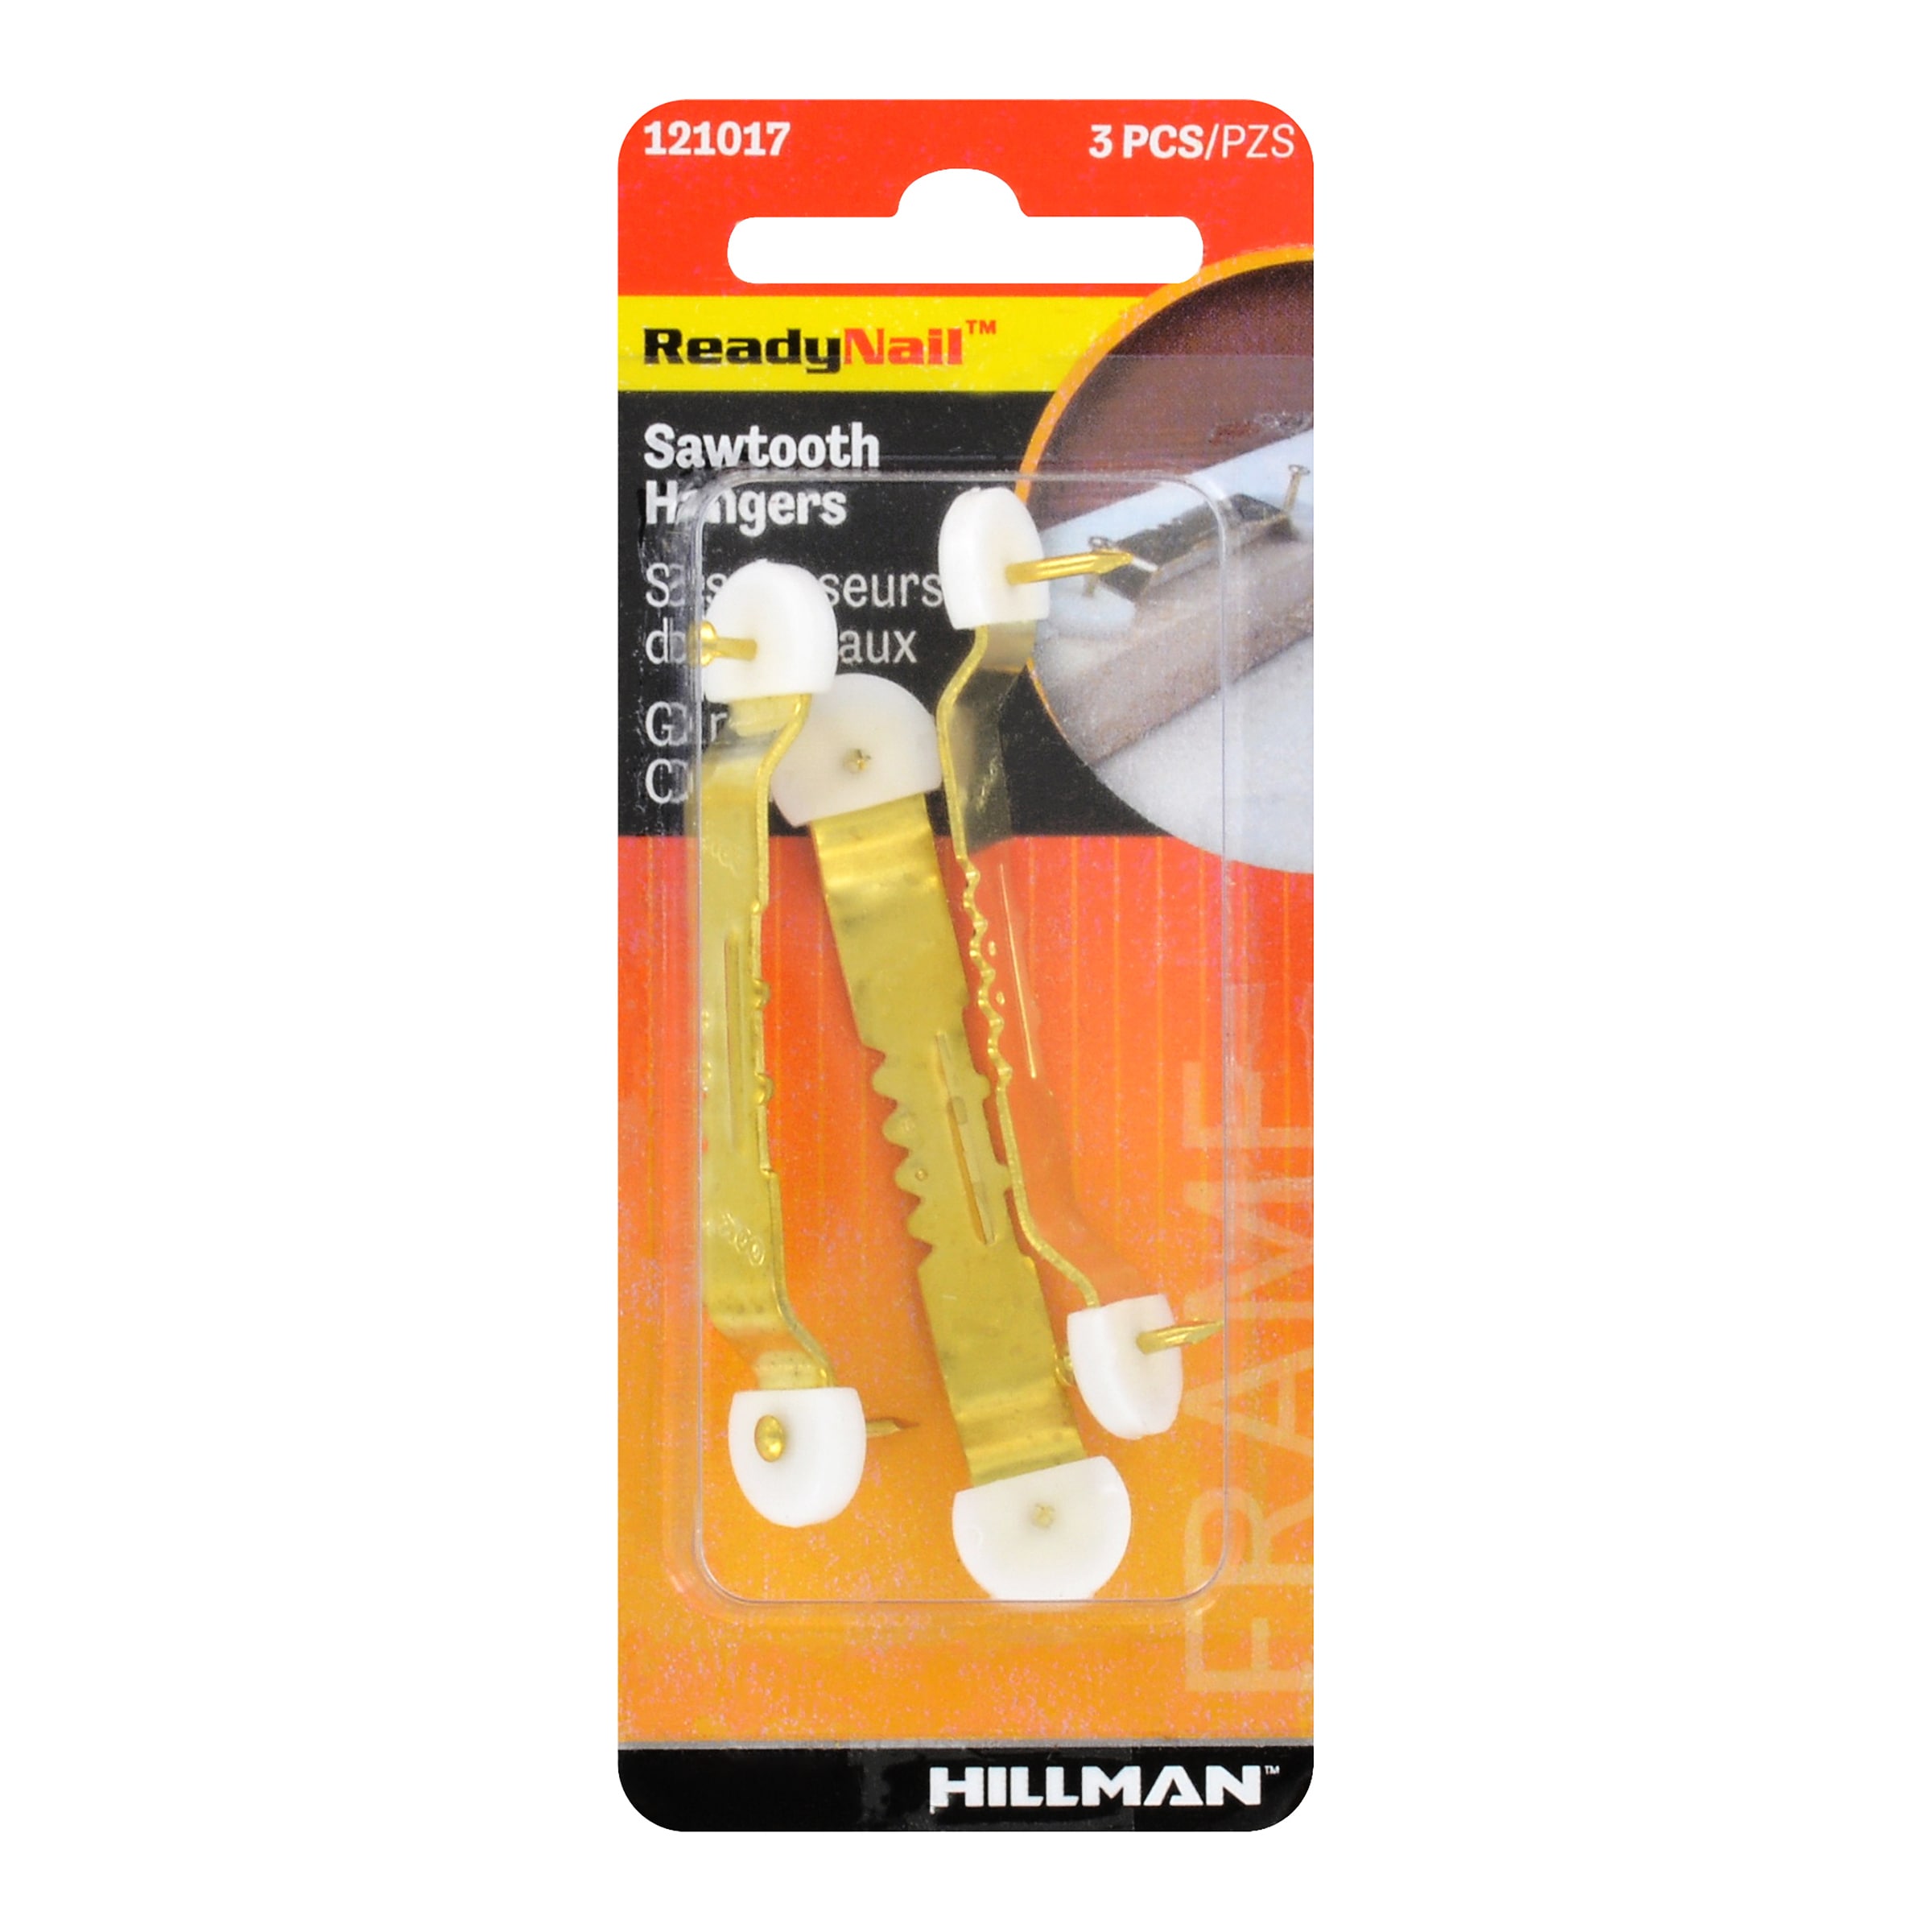 Hillman ReadyNail 5lb Sawtooth Picture Hangers (3 piece) in the Picture  Hangers department at